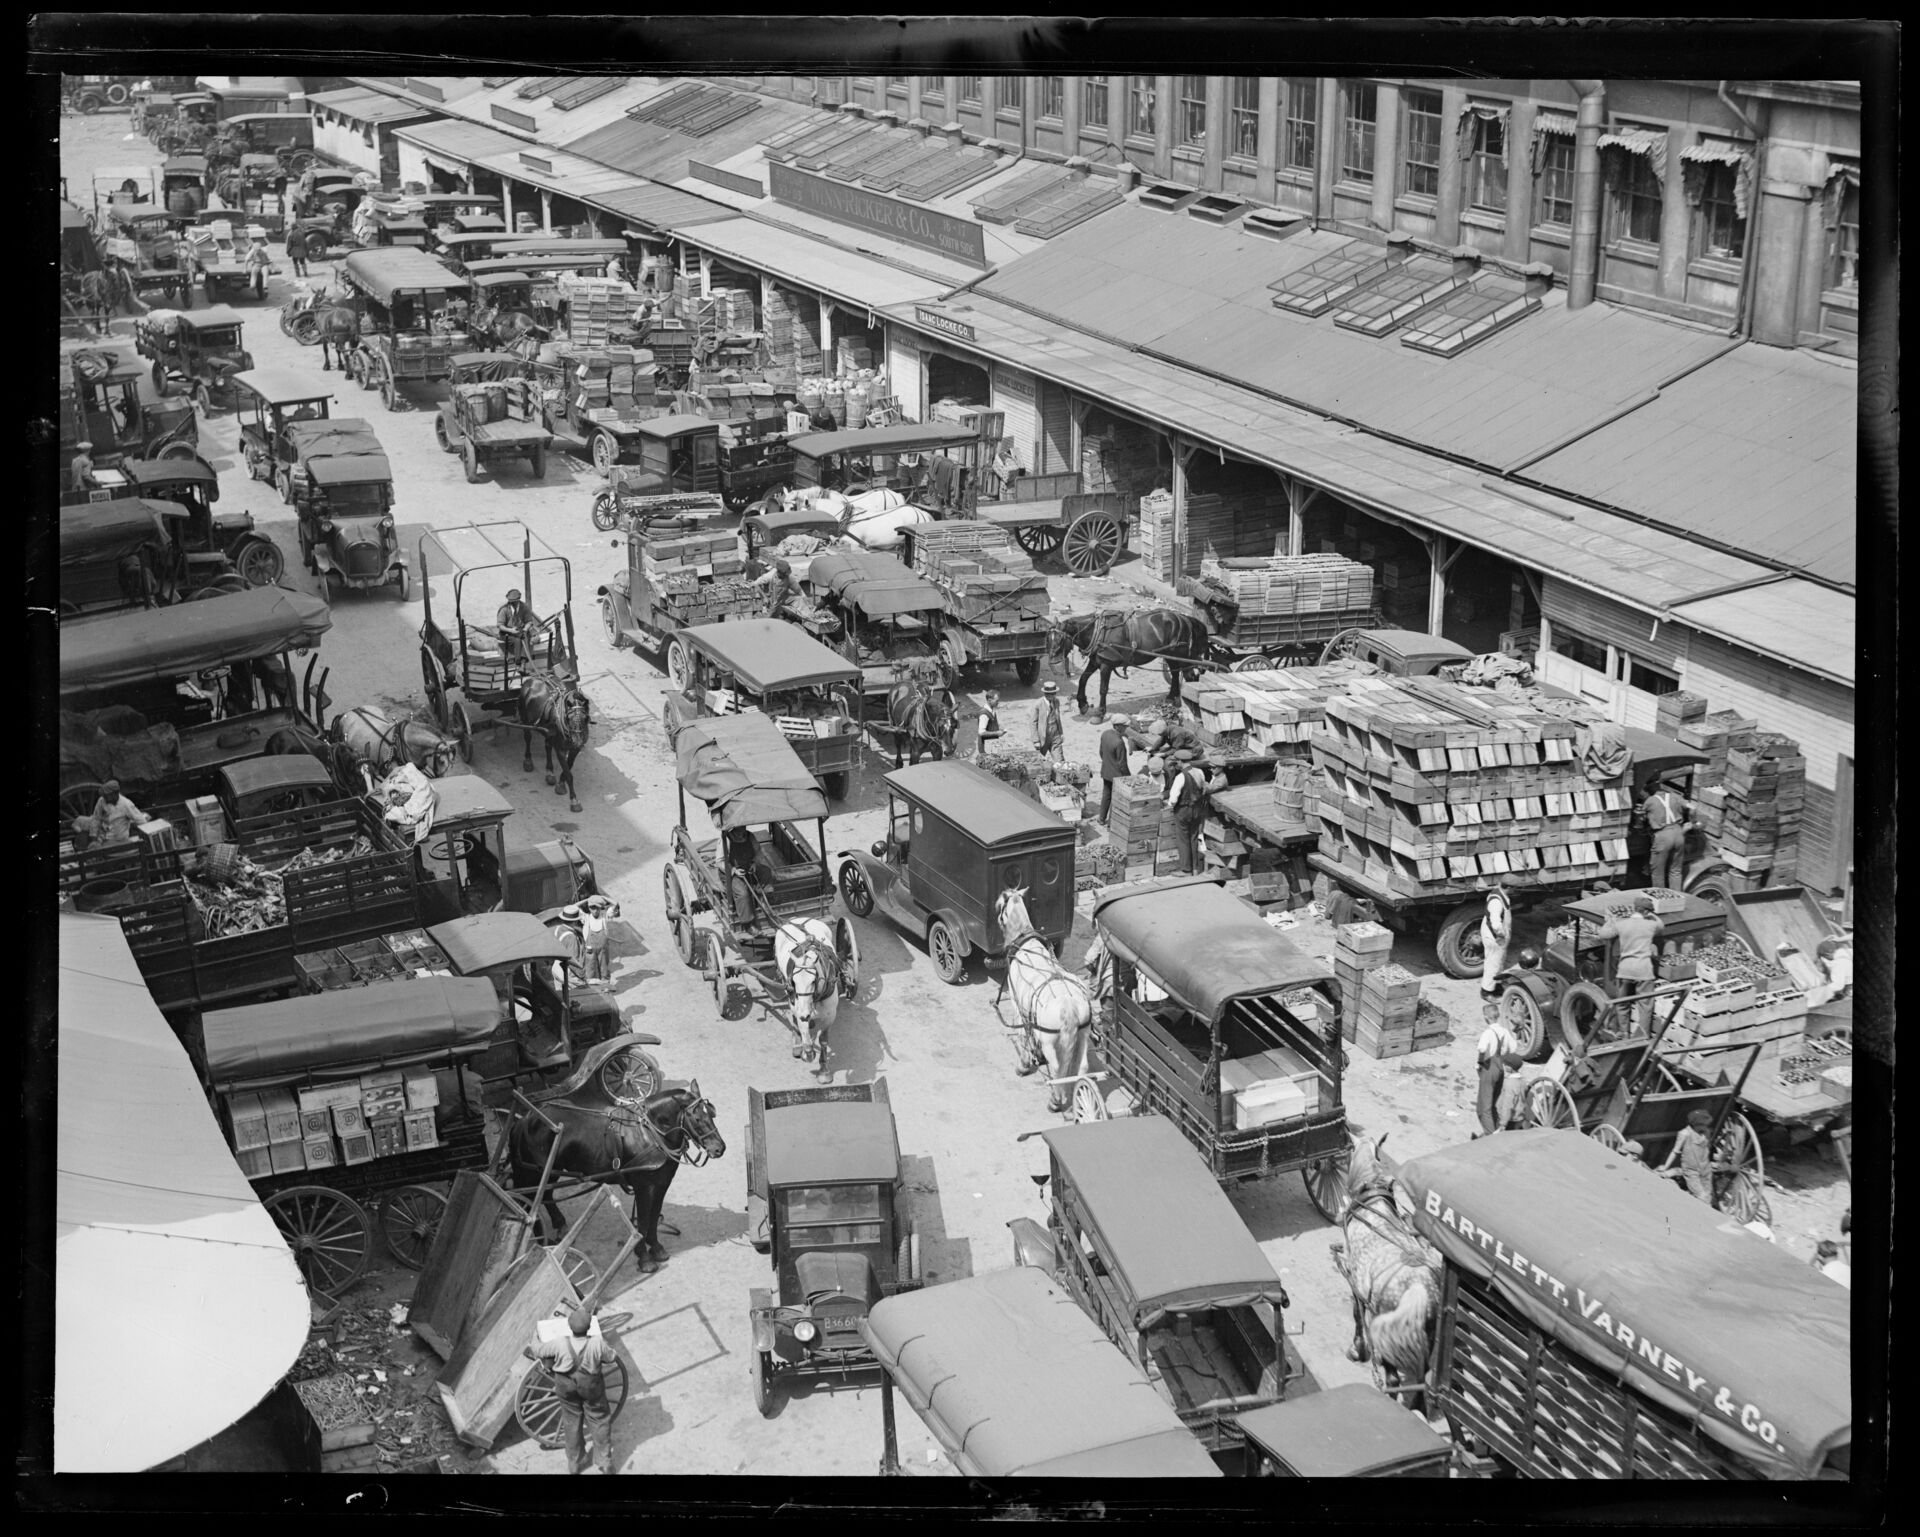 Market district on a busy day in 1923